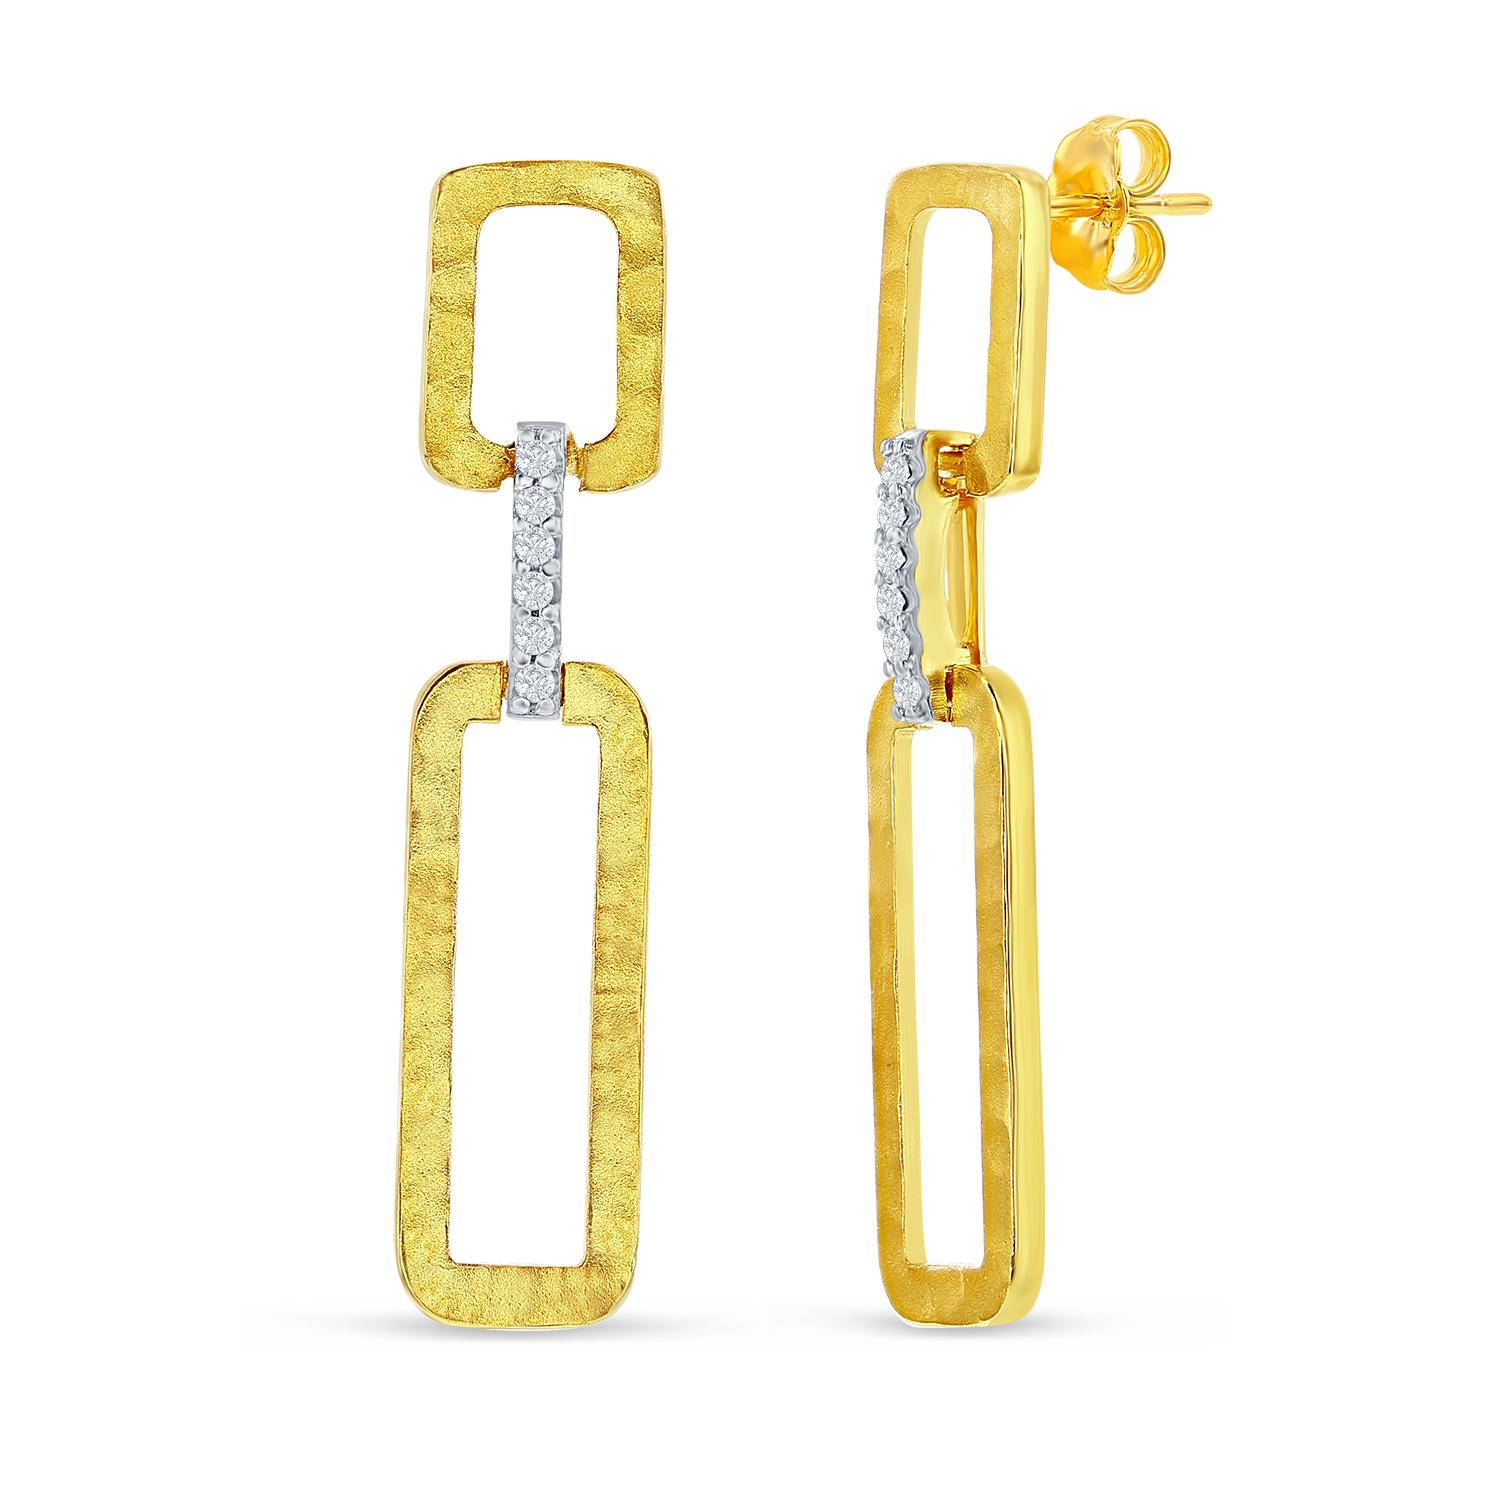 Hand-Crafted 14K Yellow Gold Dangling Open Rectangle-Shaped Link Earrings In New Condition For Sale In Great Neck, NY